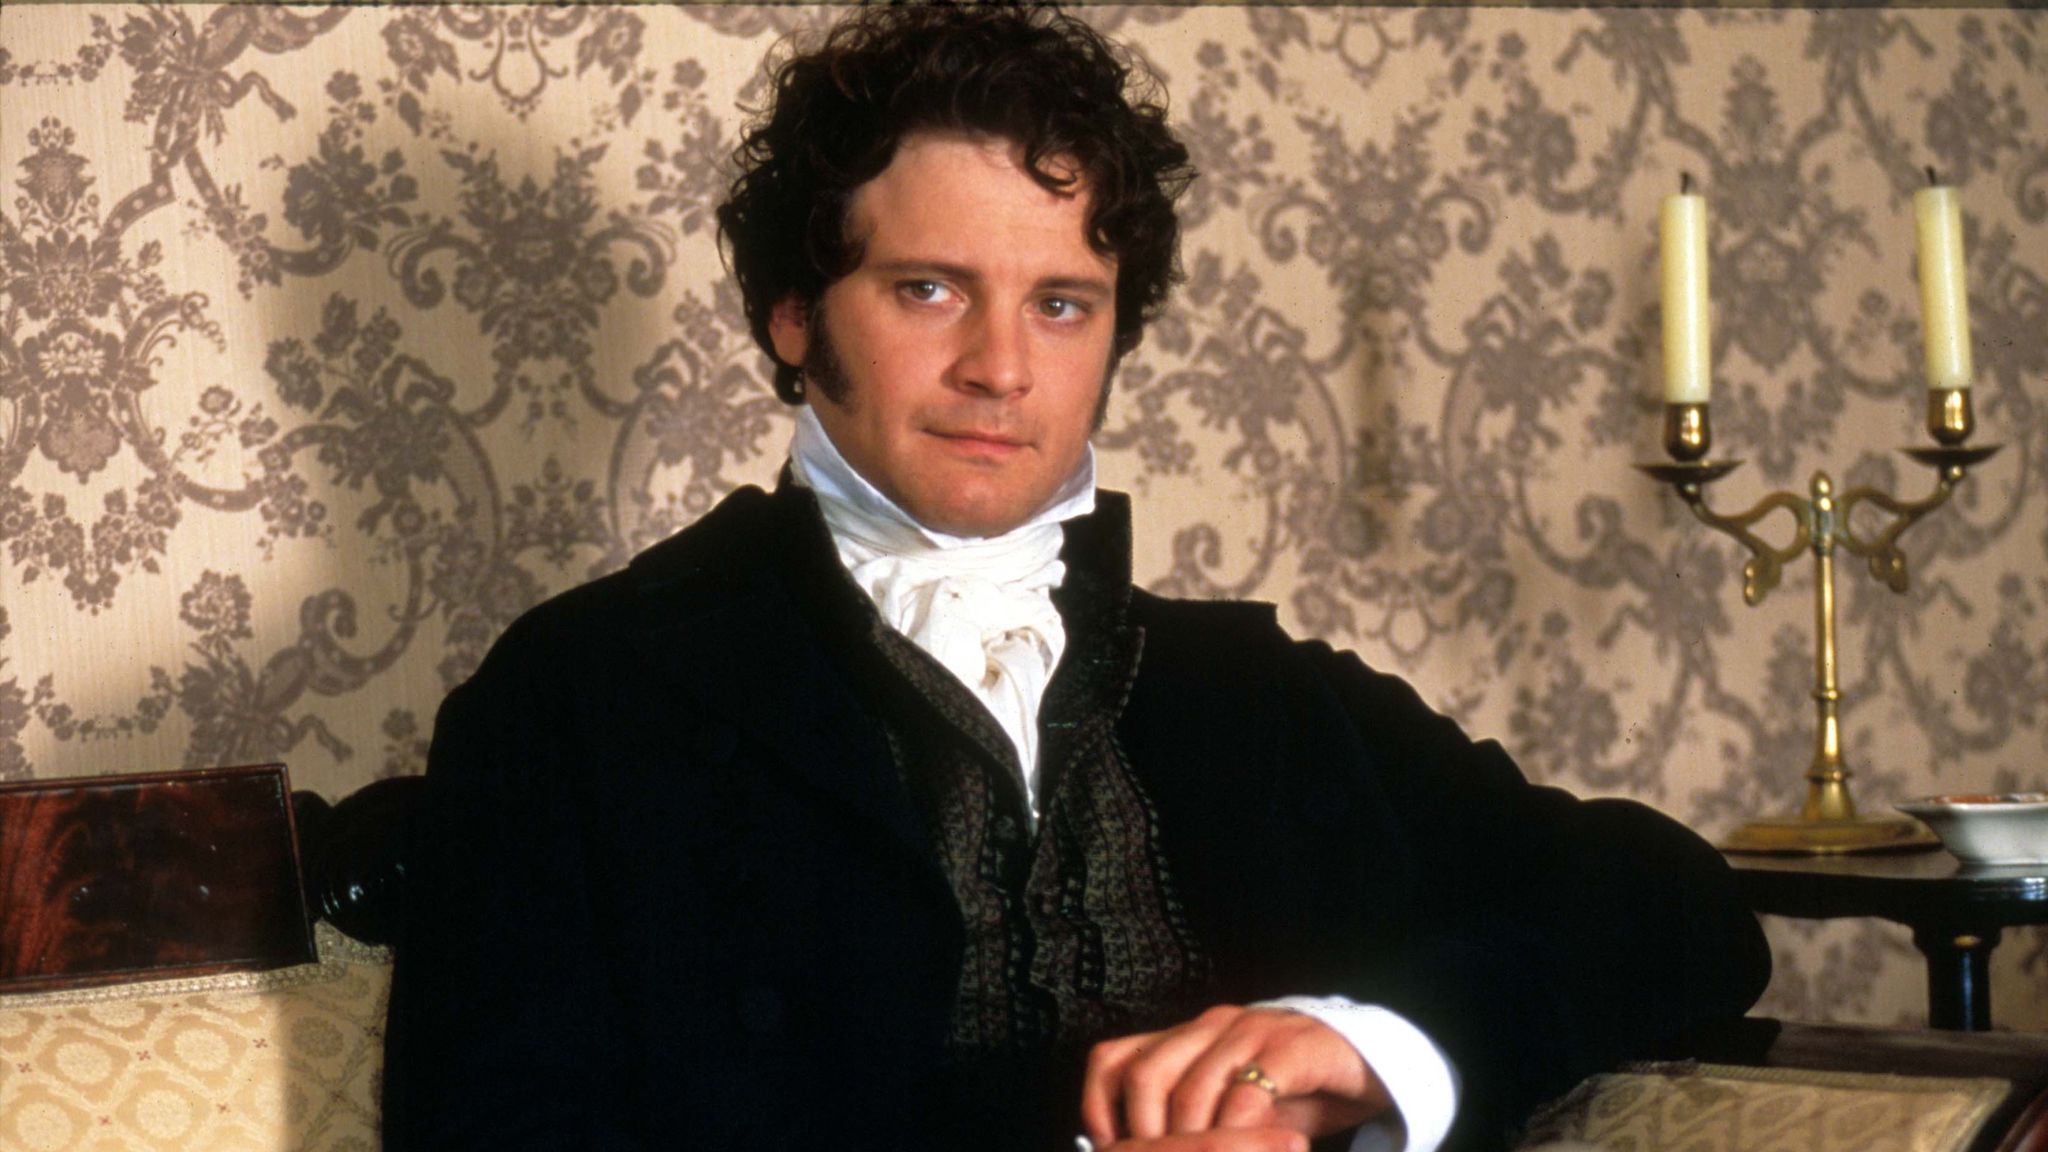 Mr. Darcy in Pride and Prejudice Character Analysis | Shmoop